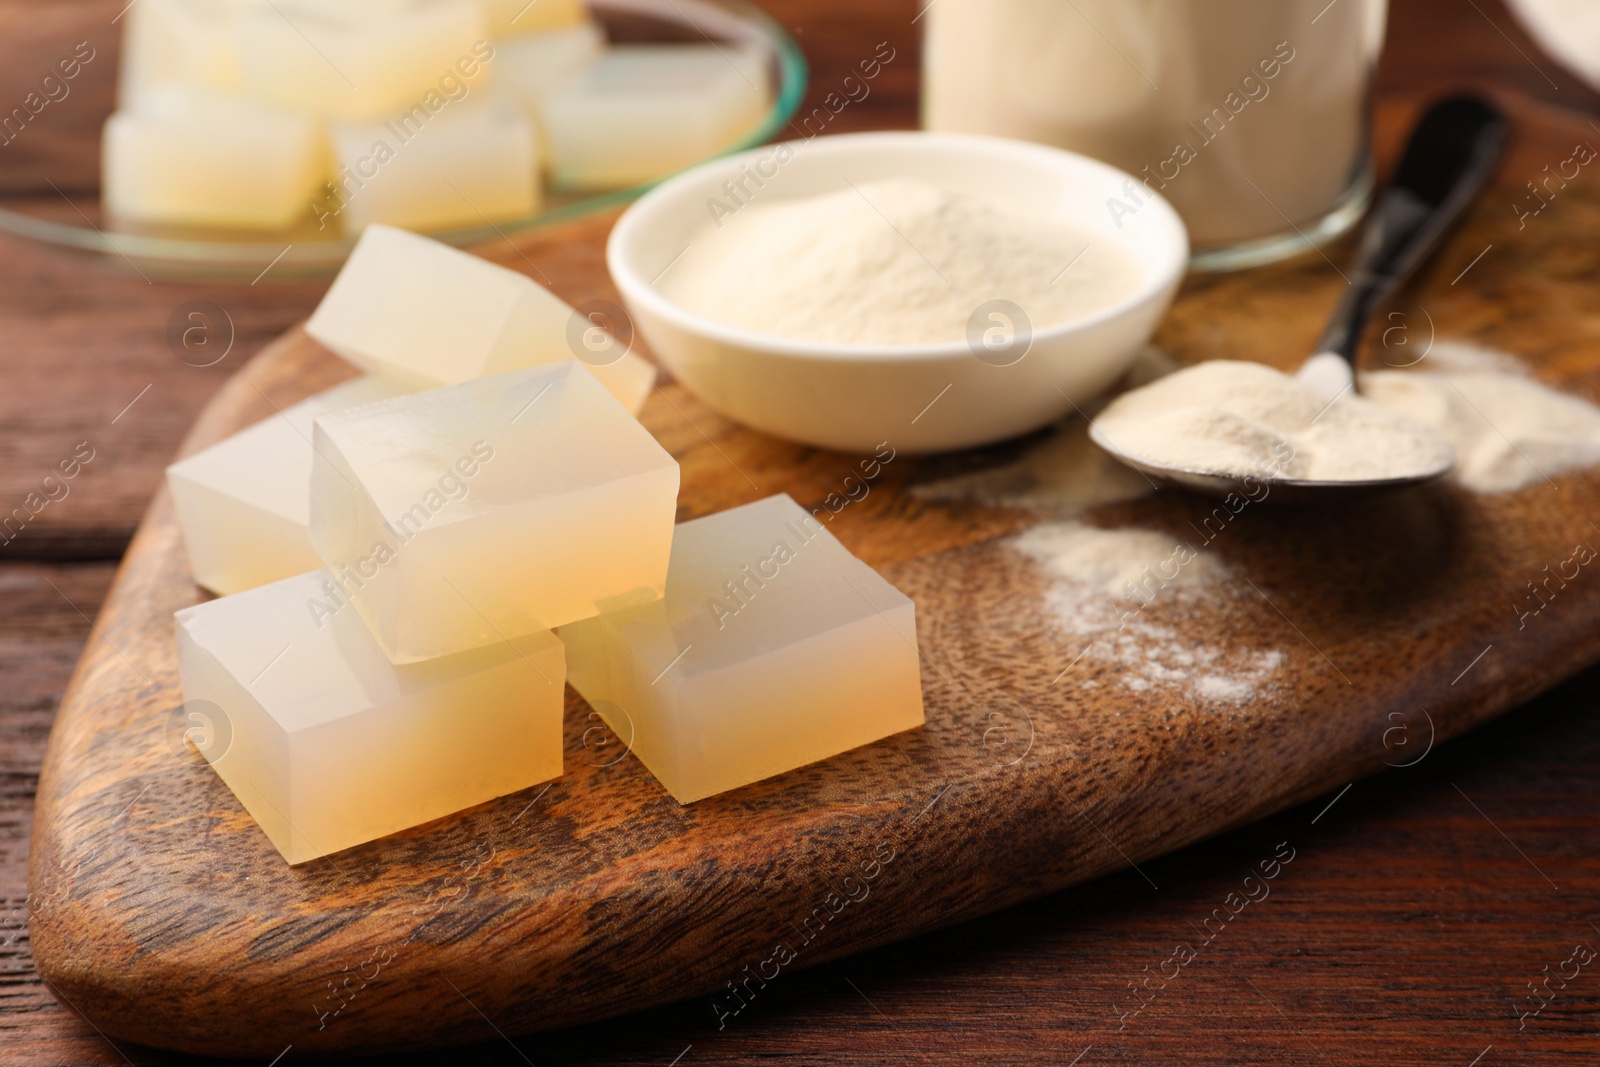 Photo of Agar-agar jelly cubes and powder on wooden table, closeup